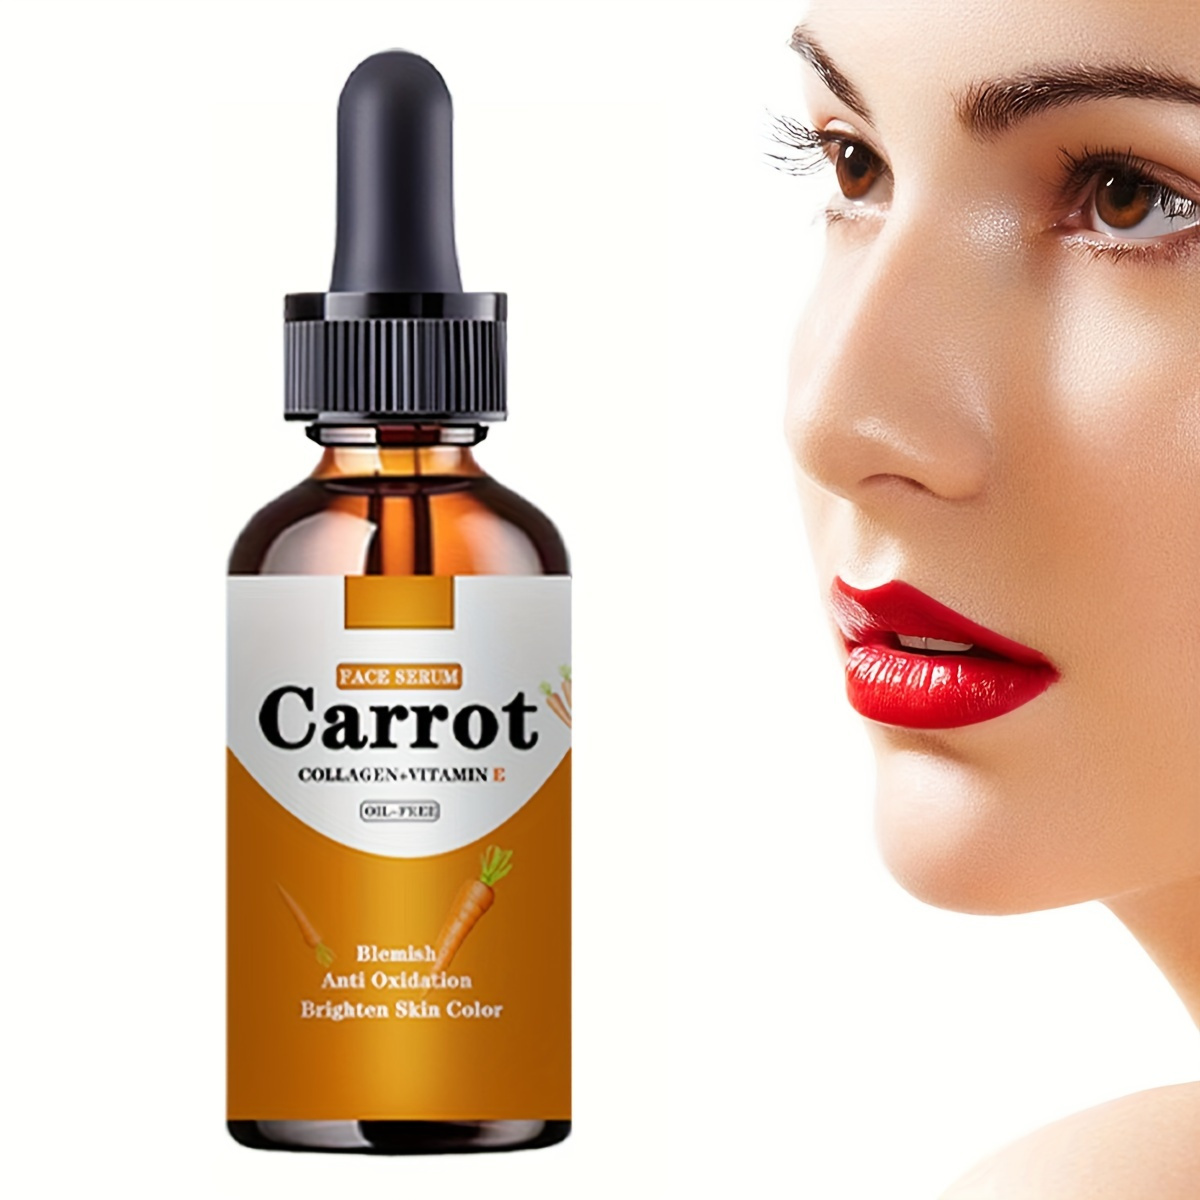 

5ml/15ml/30ml/50ml Carrot Vitamin E Collagen Facial With Niacinamide And Citric Acid, Shrink Pores, Improve Skin Tone And Control Oil With Plant Squalane